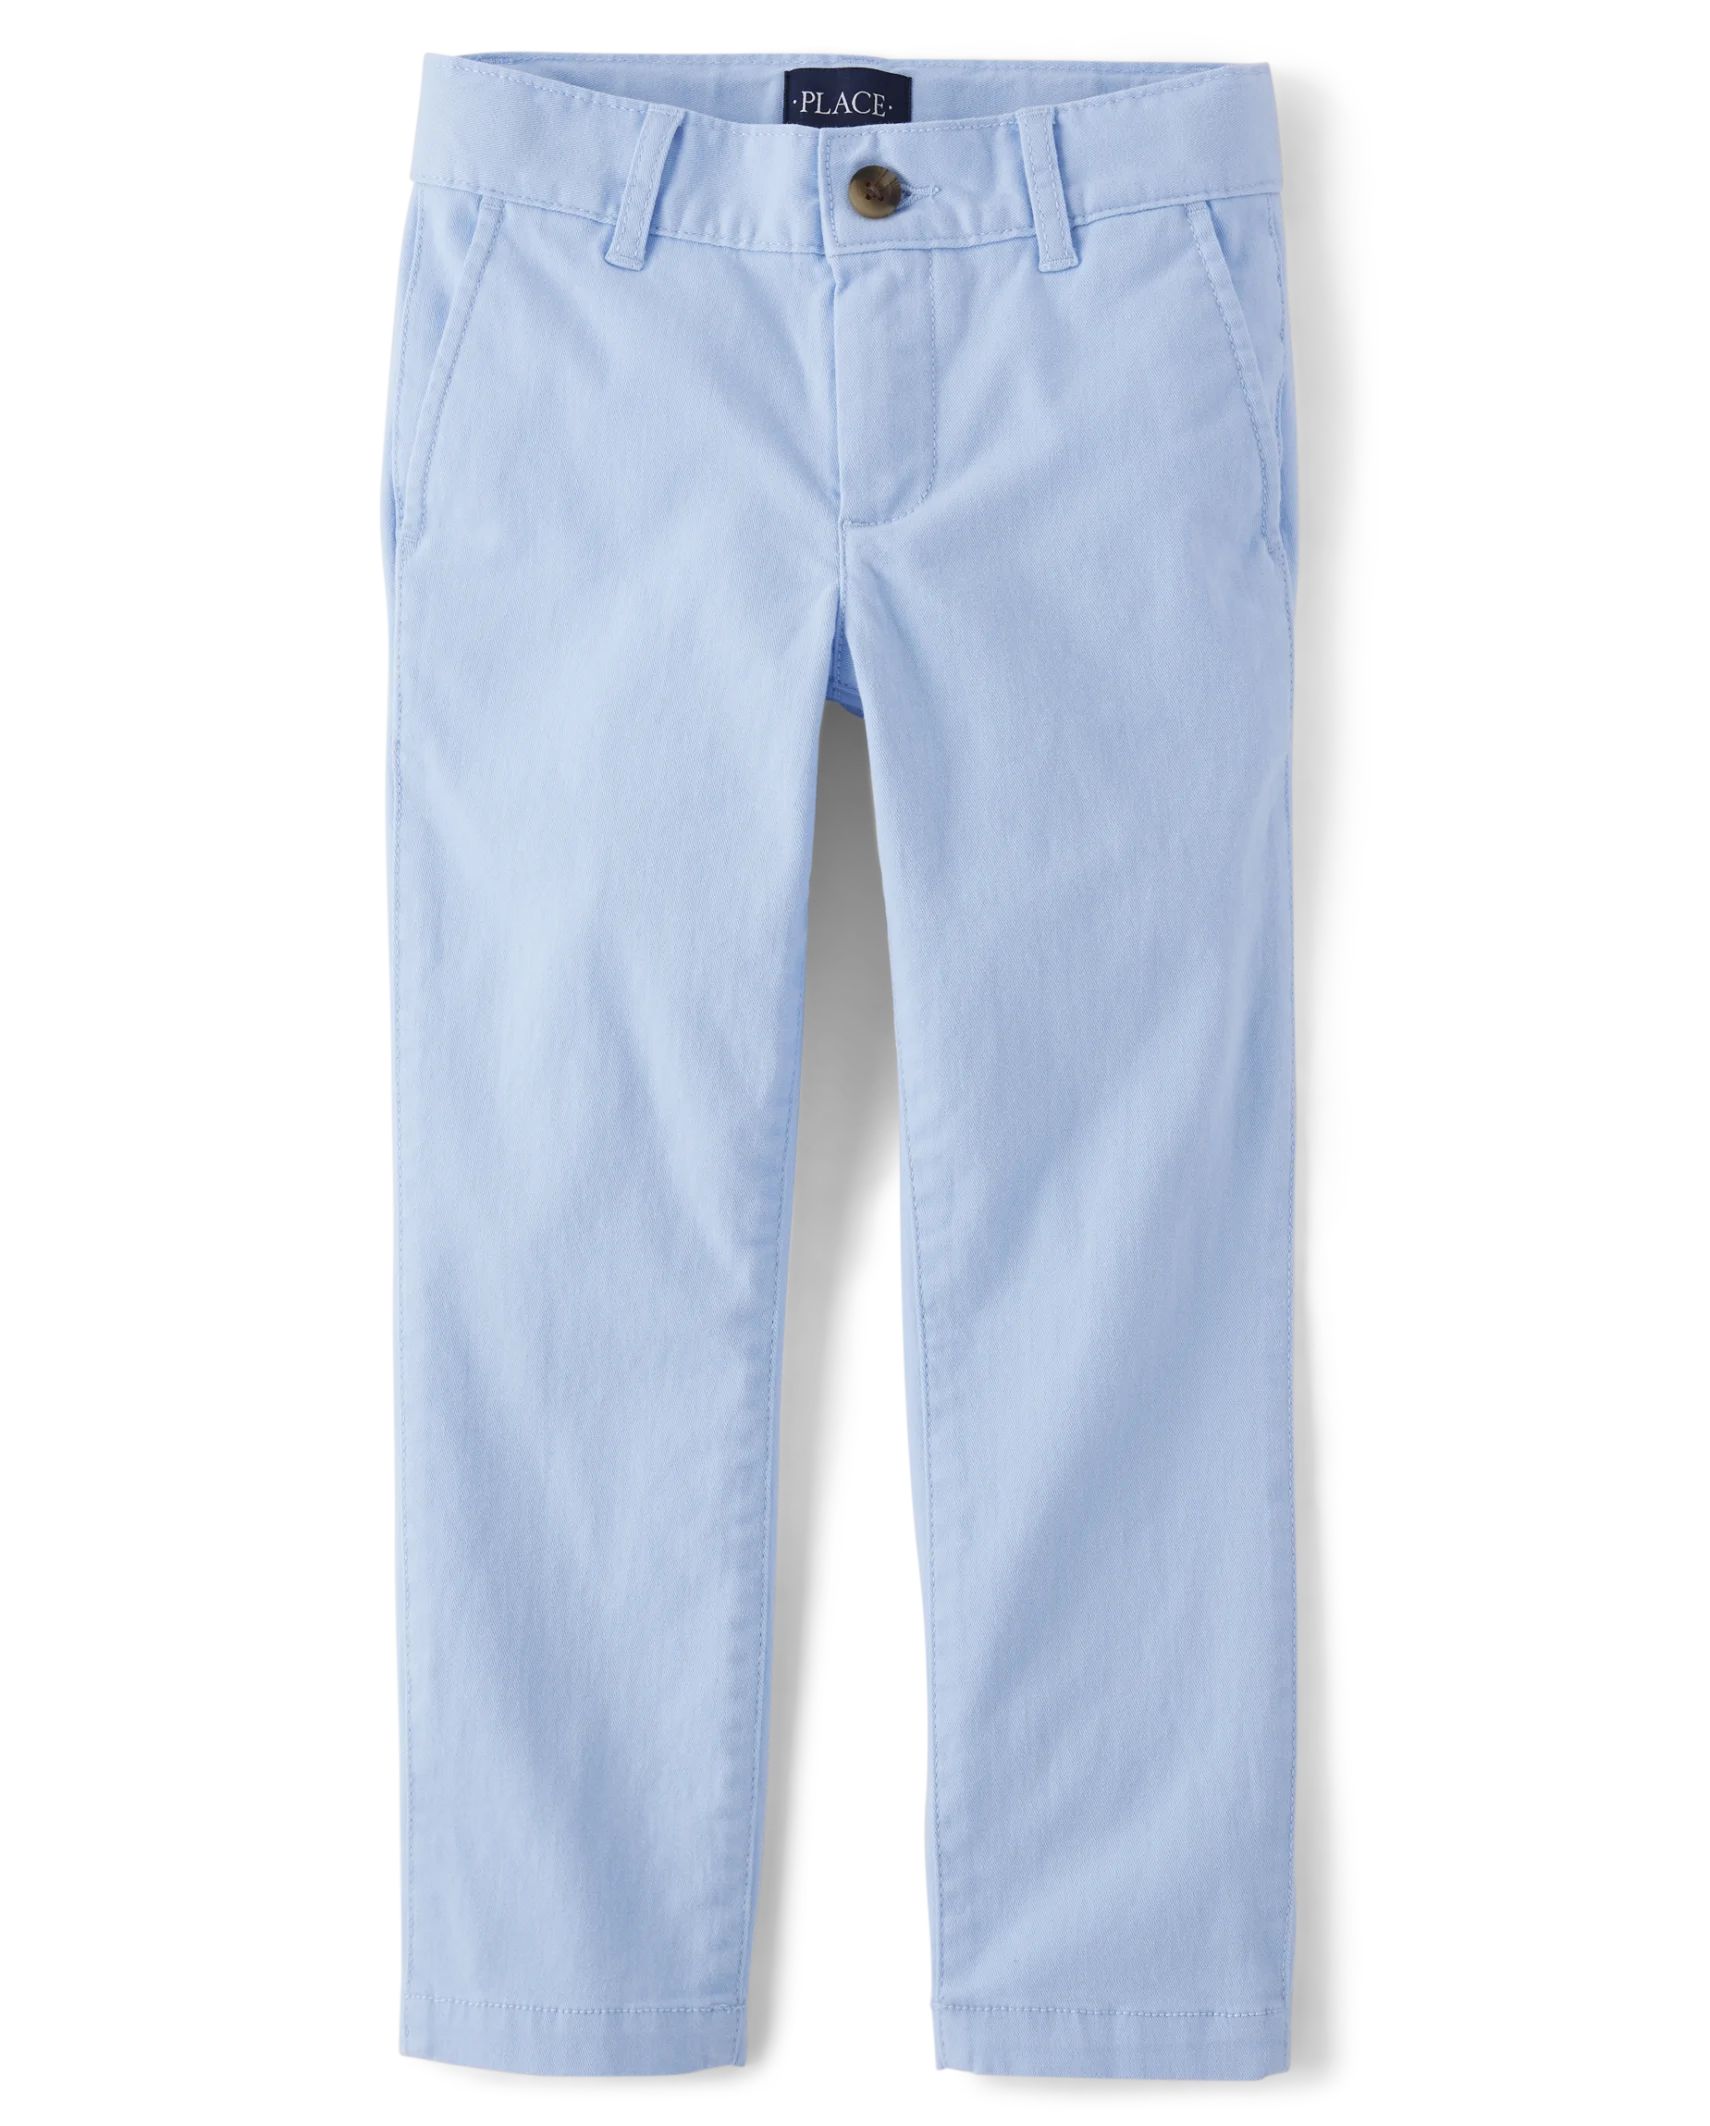 Boys Stretch Skinny Chino Pants - whirlwind | The Children's Place